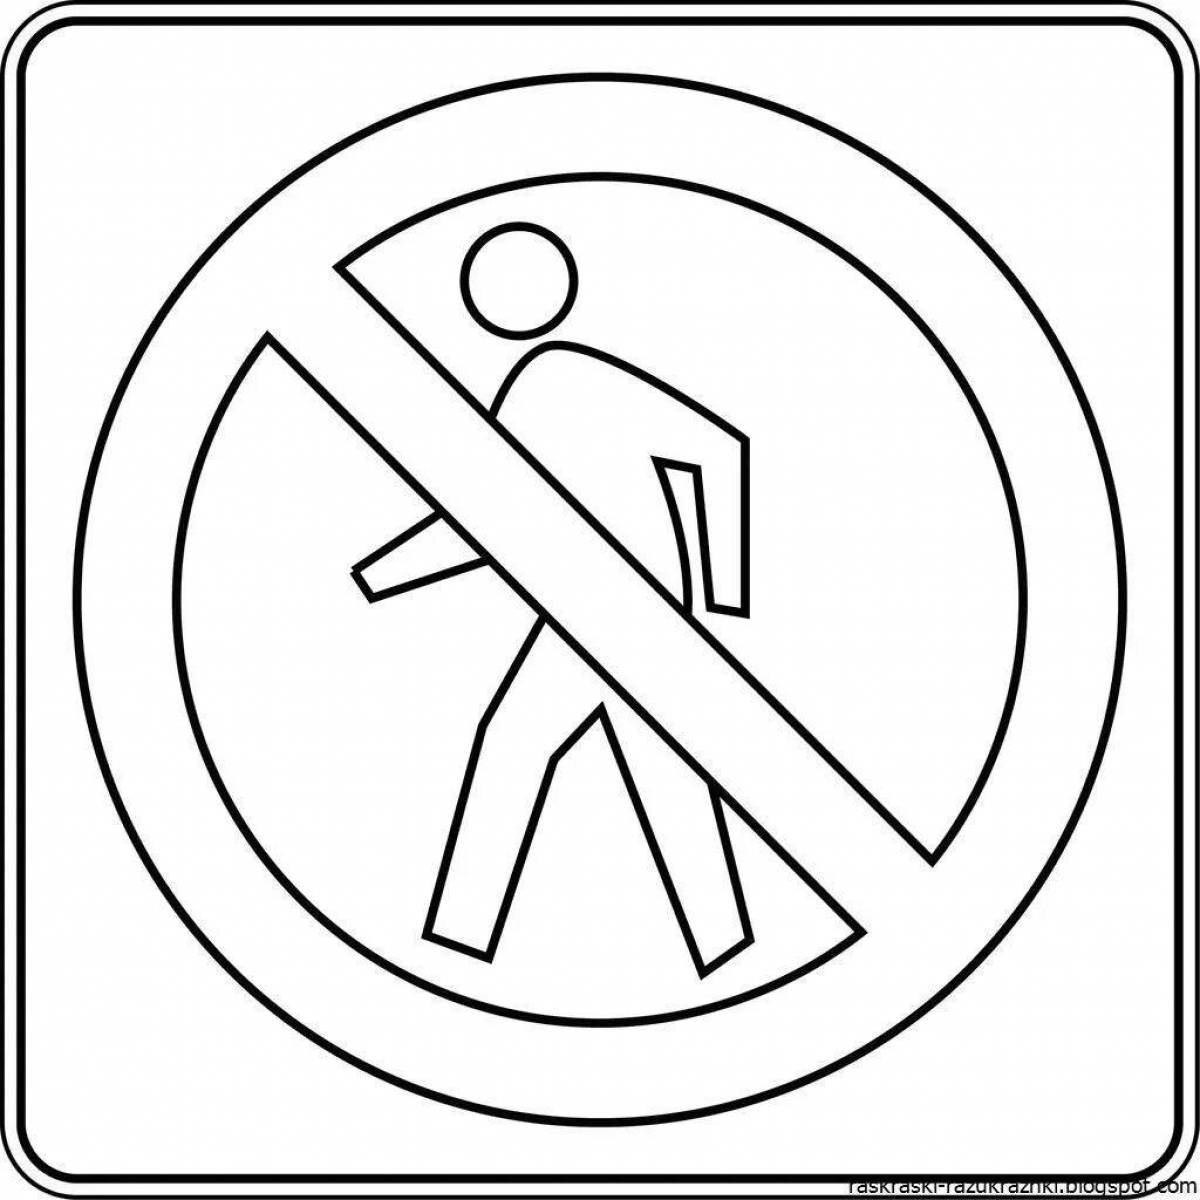 Use of prohibition signs for babies